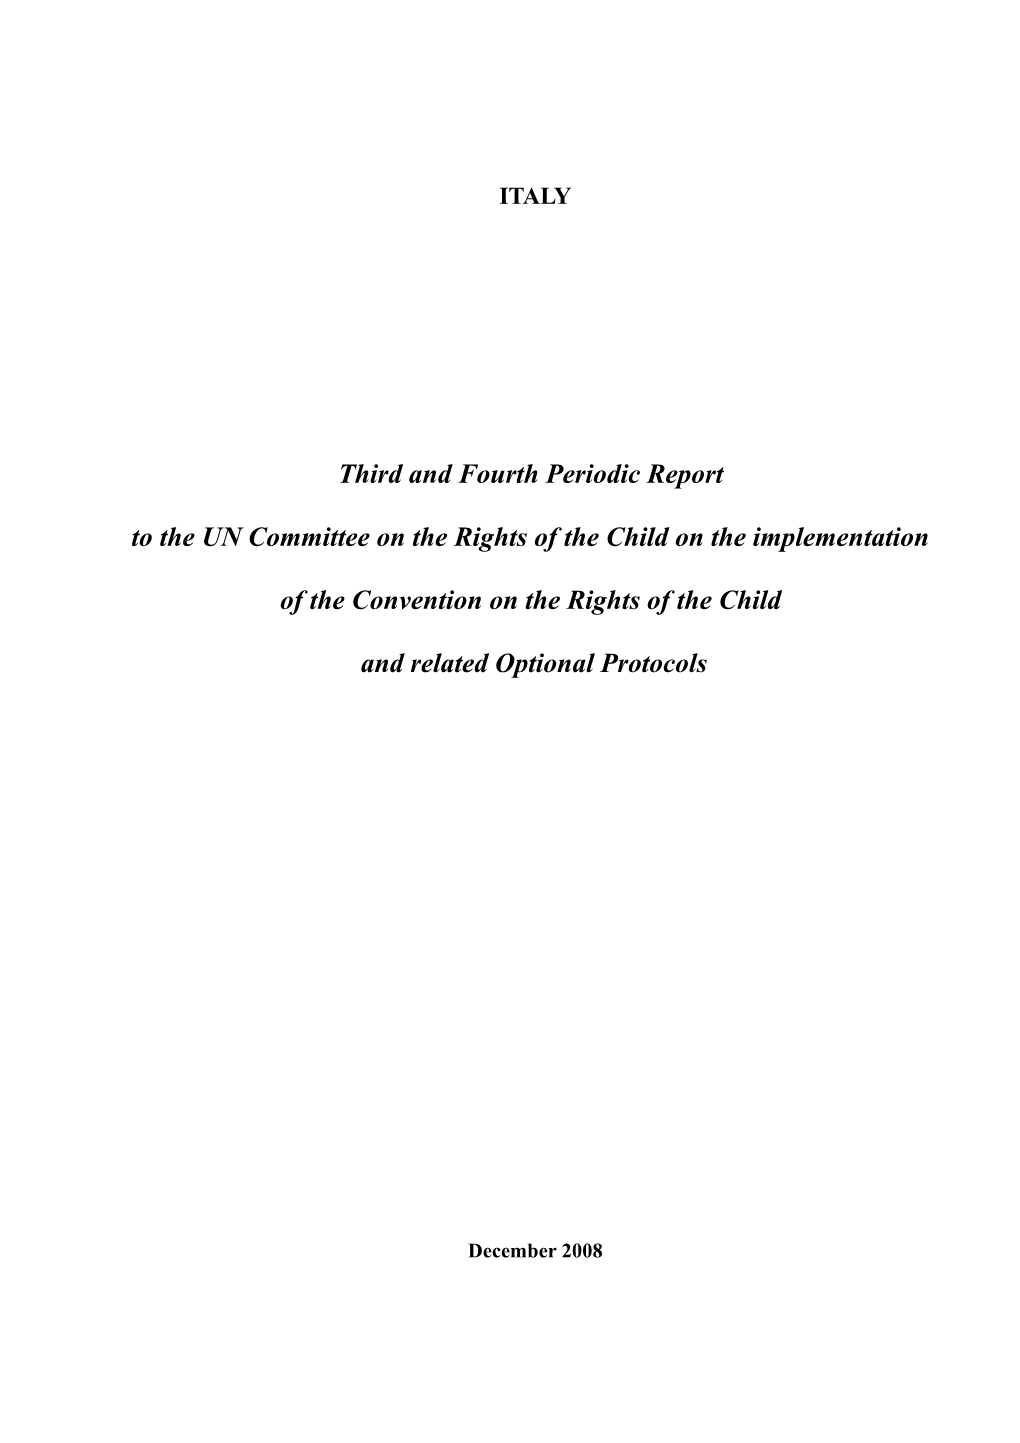 Third and Fourth Periodic Report